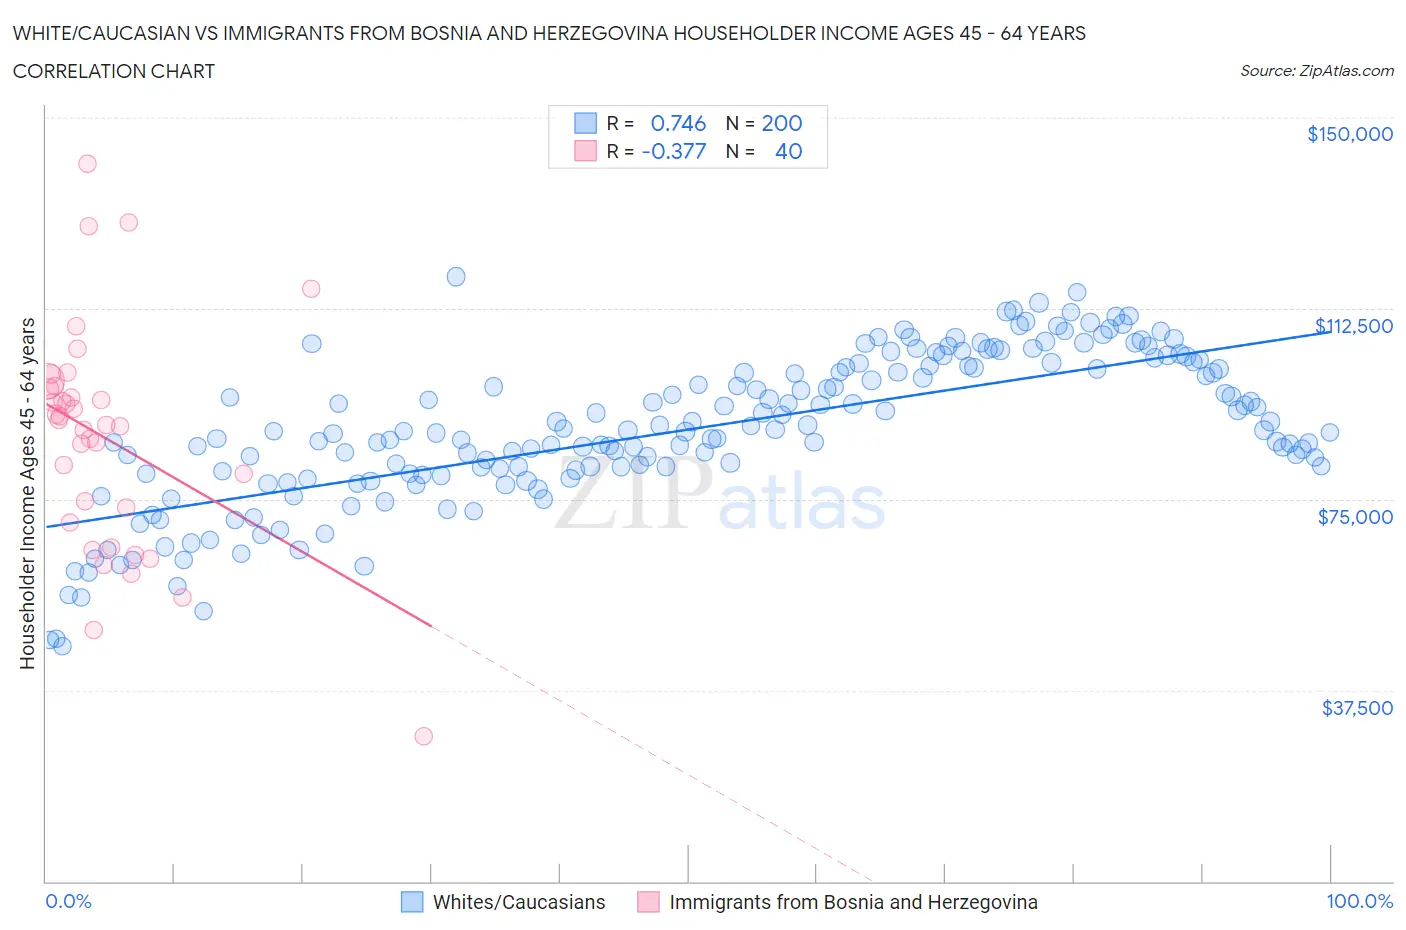 White/Caucasian vs Immigrants from Bosnia and Herzegovina Householder Income Ages 45 - 64 years